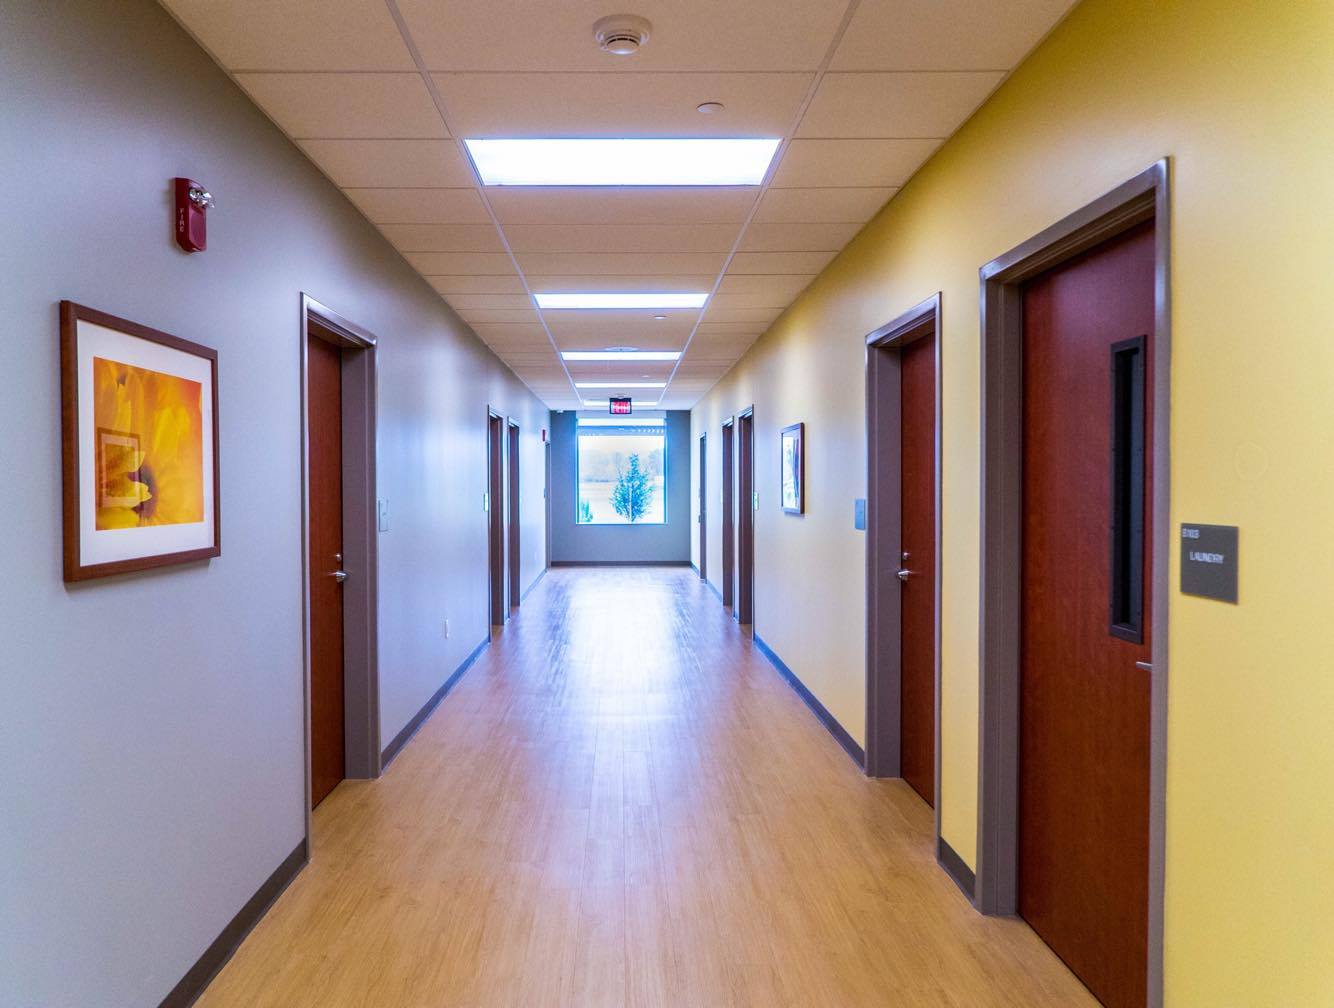 Hall of Smokey Point Behavioral Hospital, offering inpatient mental health care